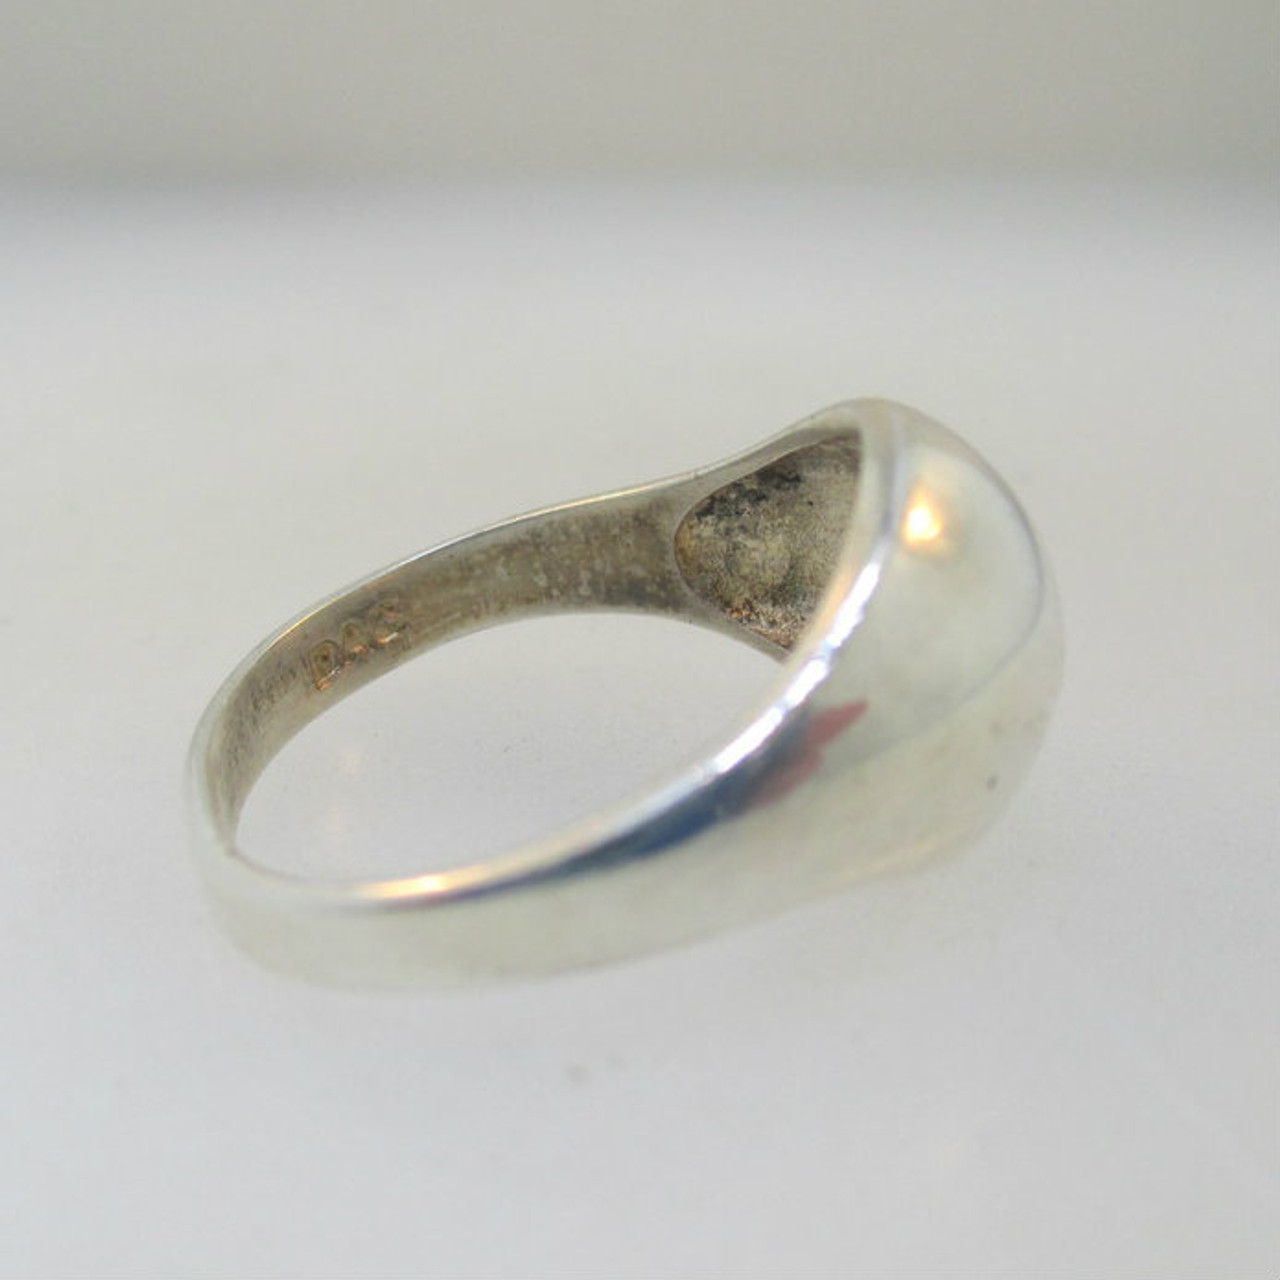 Sterling Silver Smooth Dome Ring Size 7.25 - American Antiques and Jewelry